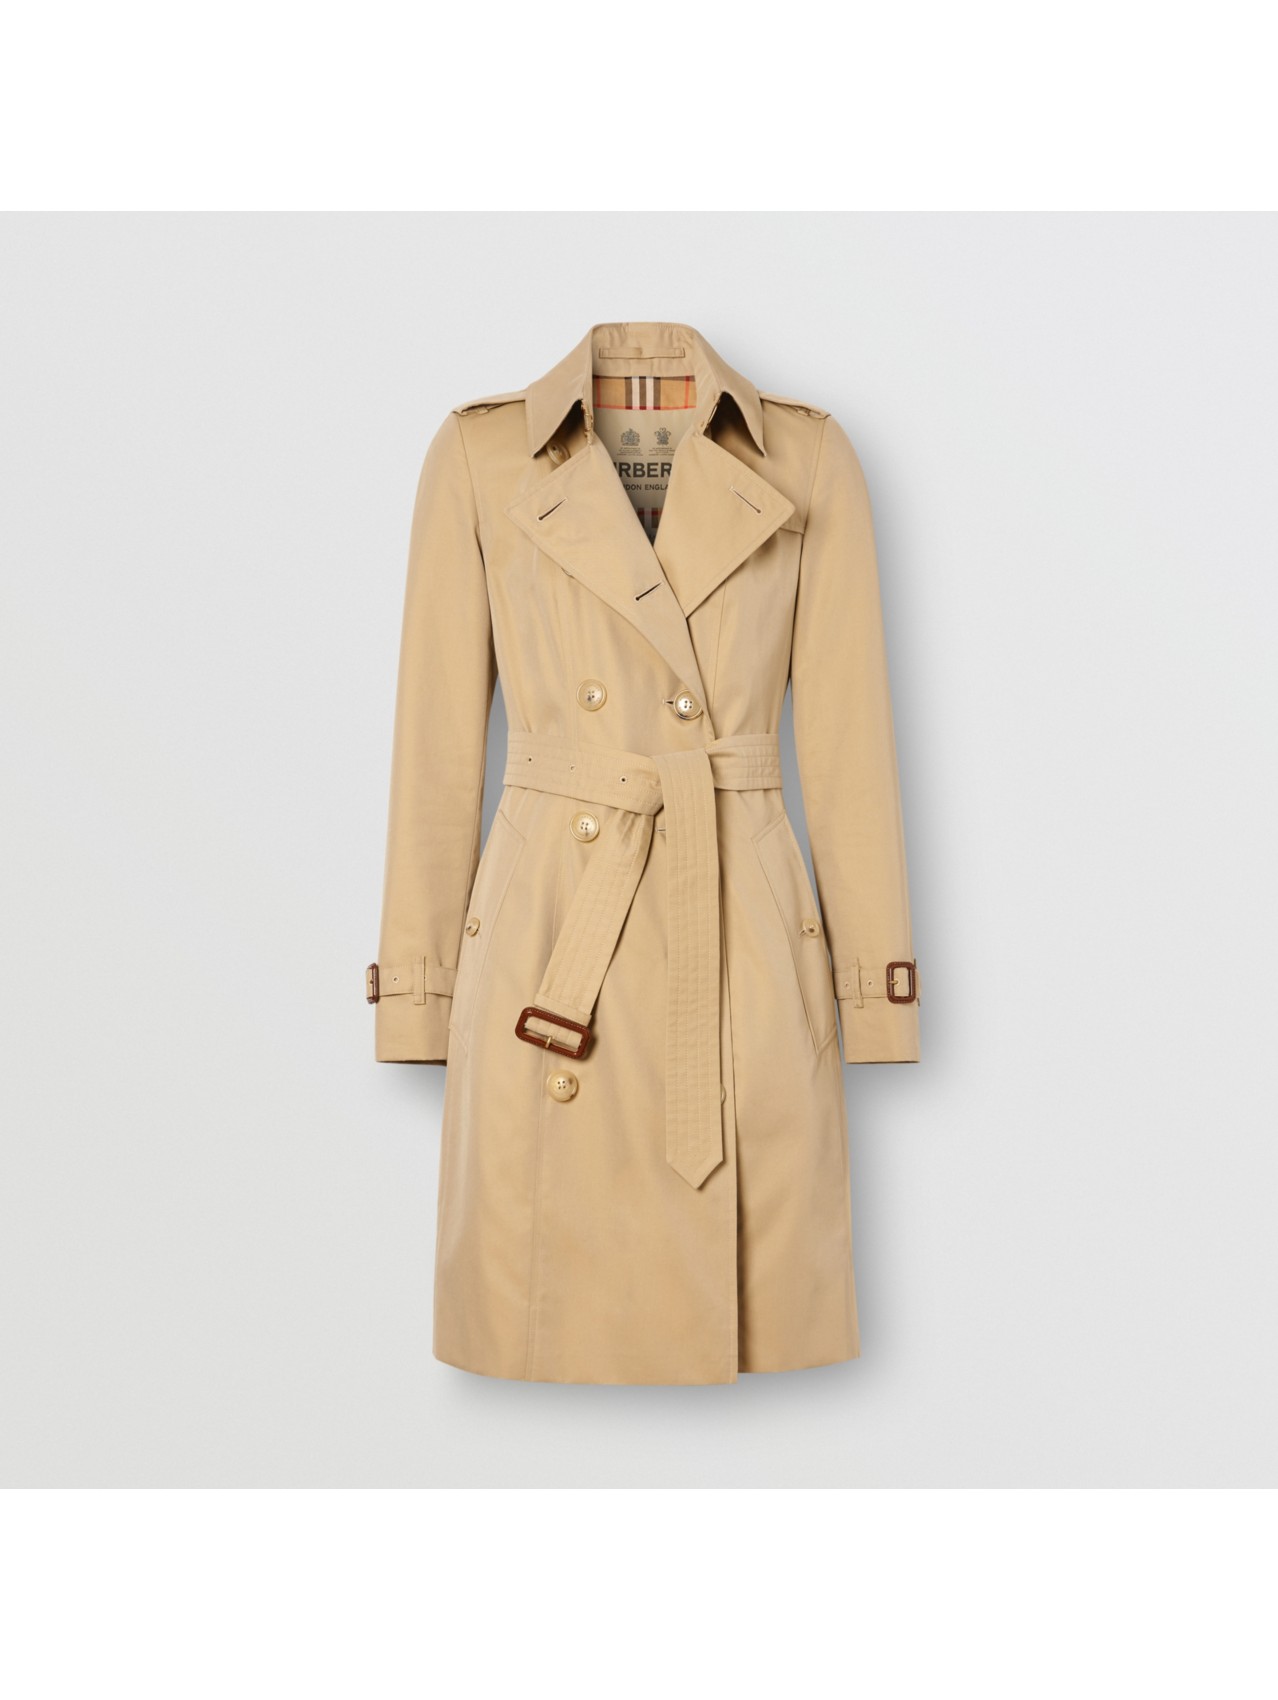 Burberry Womens Trench Coat Size Chart Tradingbasis